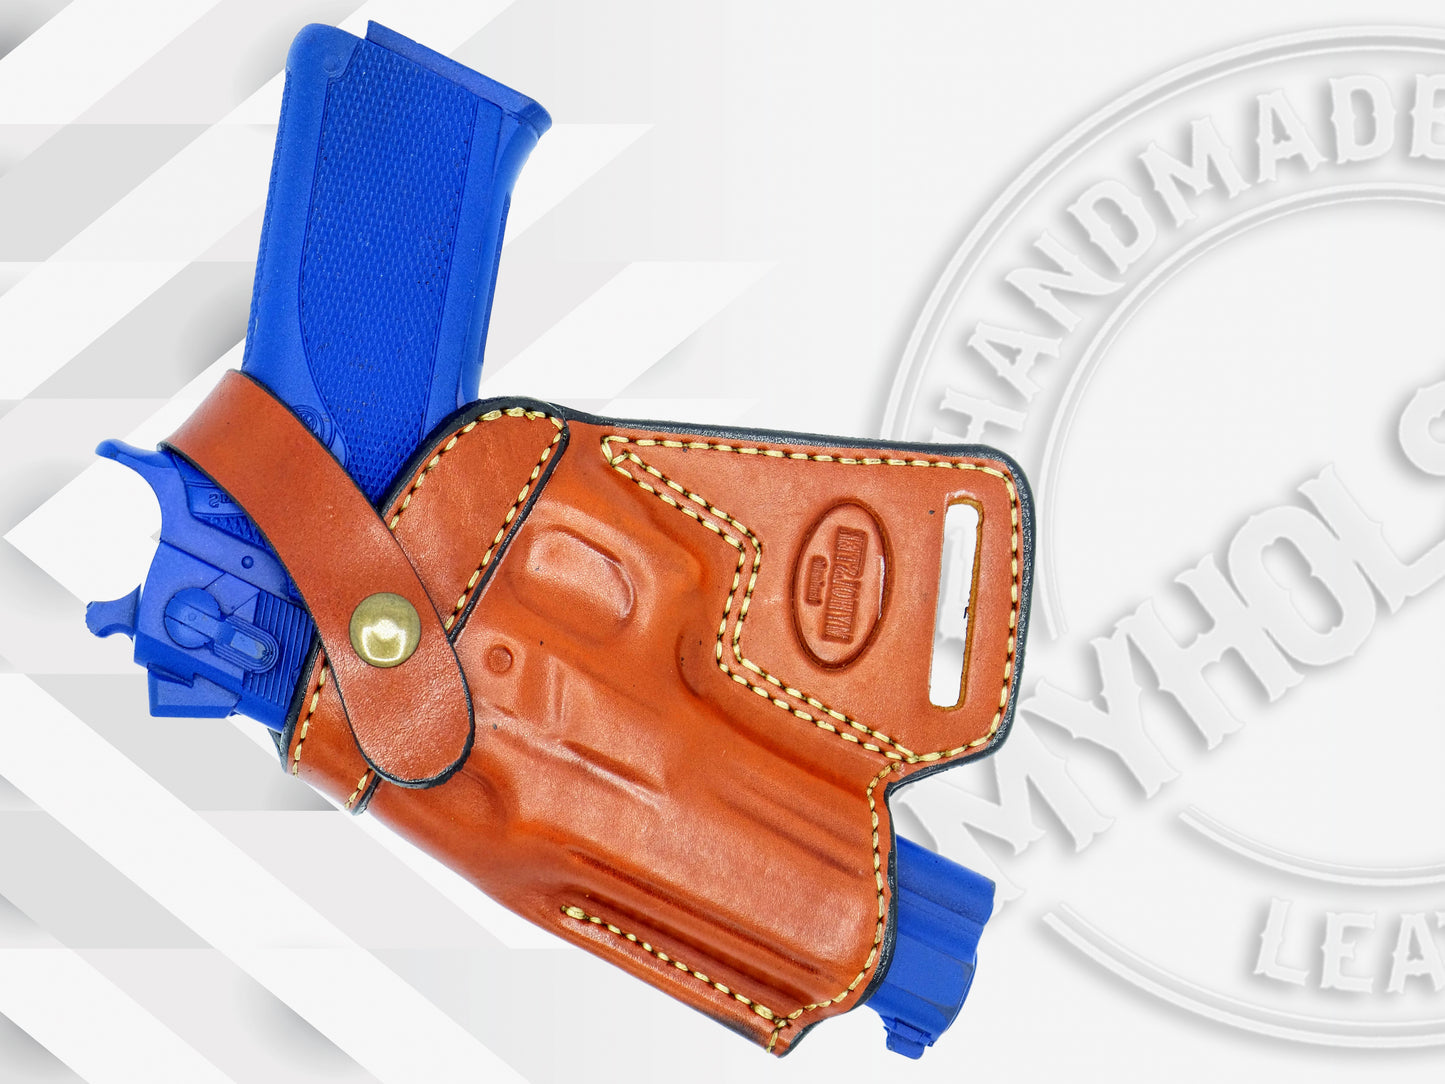 Smith & Wesson Model 4506 SOB Small Of the Back Leather Holster